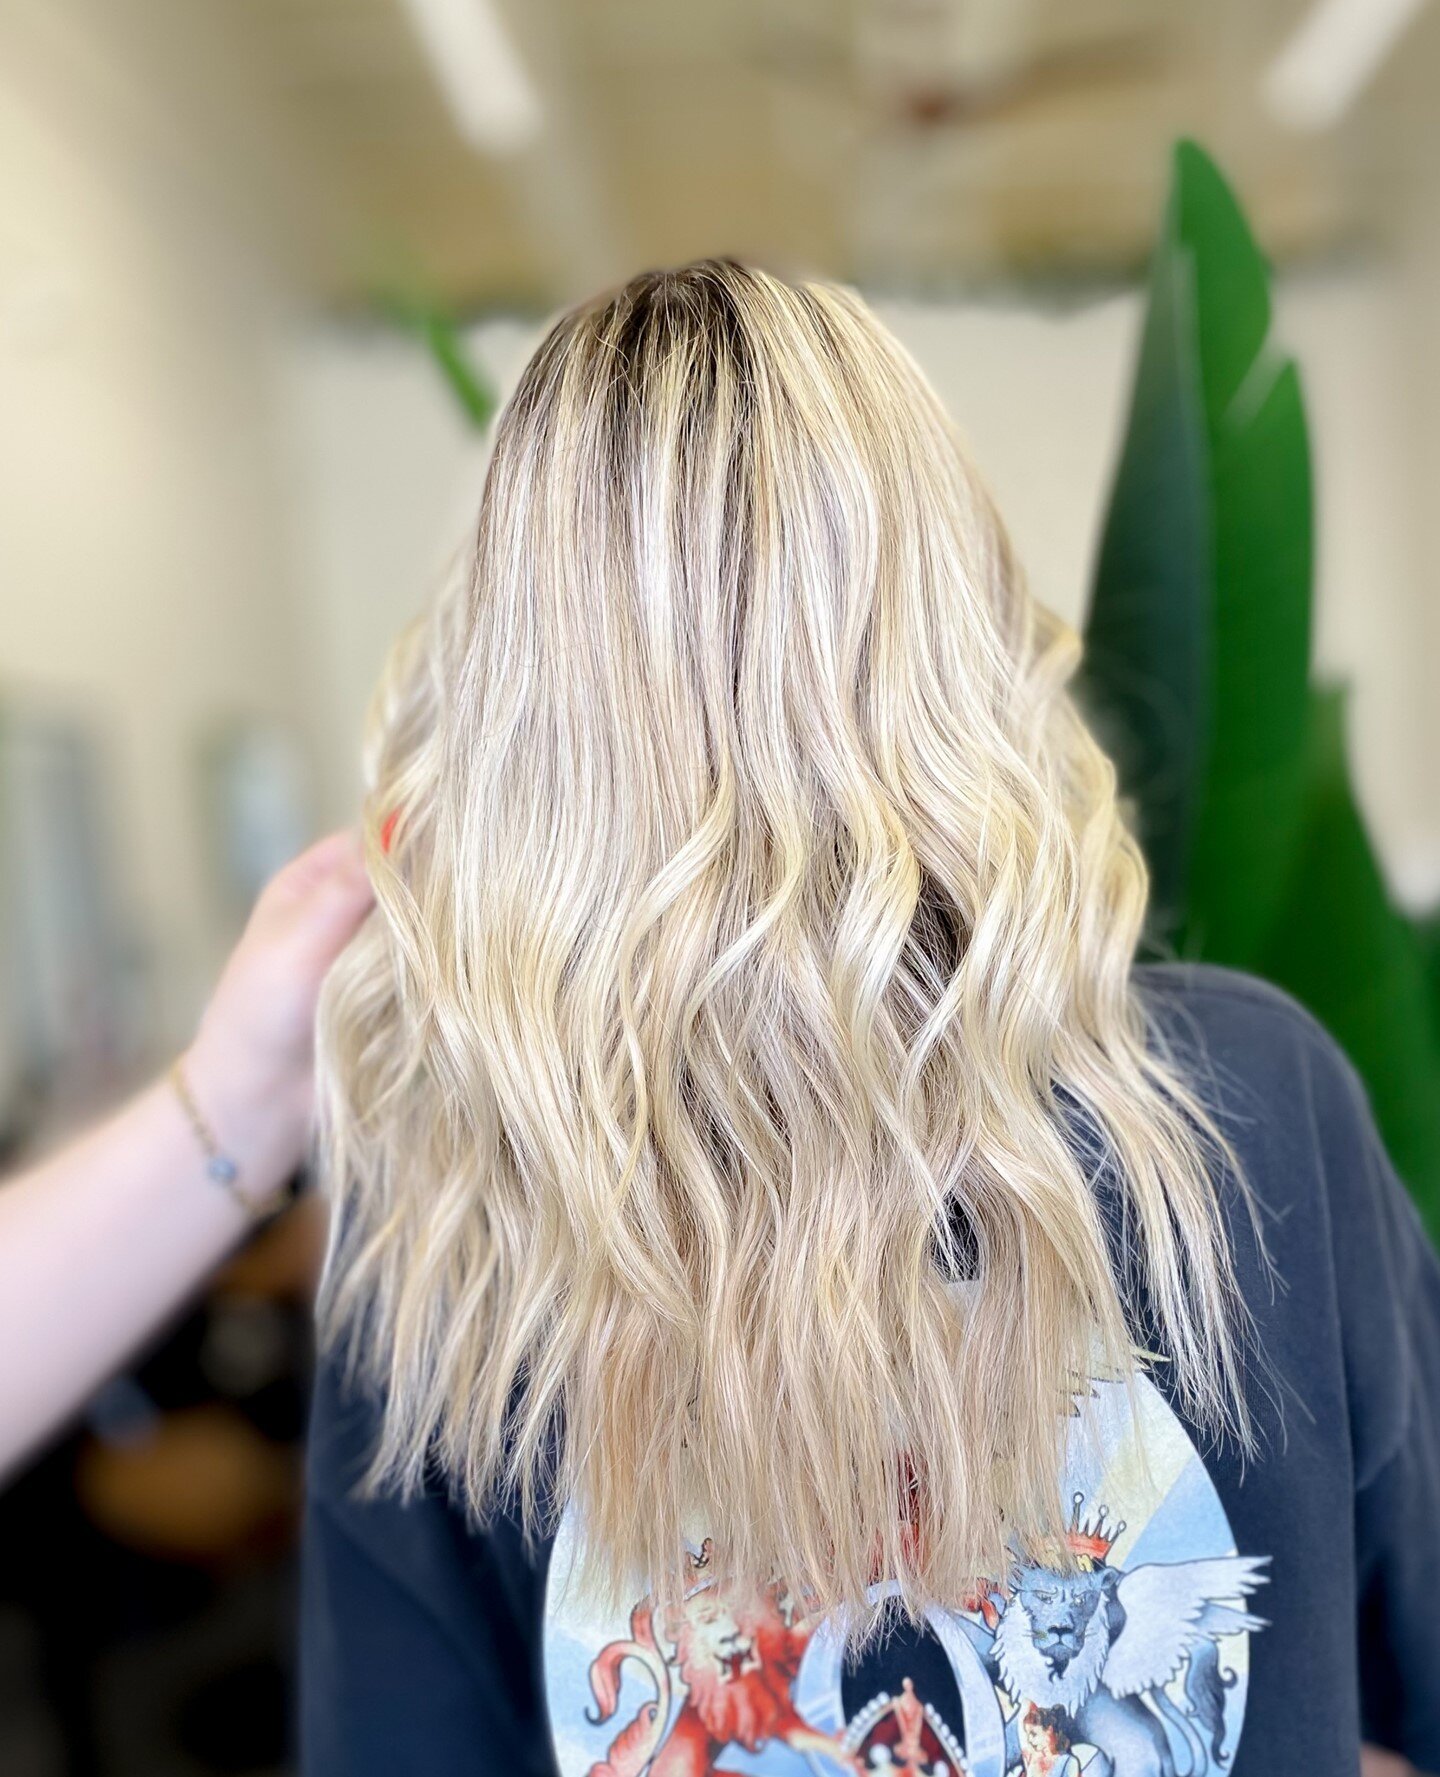 This butter color with medium layers is a game changer🤍 #glamourax 
.
.
.
.
.
#hairdressersthatslay #scissorovercomb #hairdressersjournal #fashion #hairshows #salonlife #creativecut #healthyhair #barbers #creativehair #love #stylist #hairoftheday #h